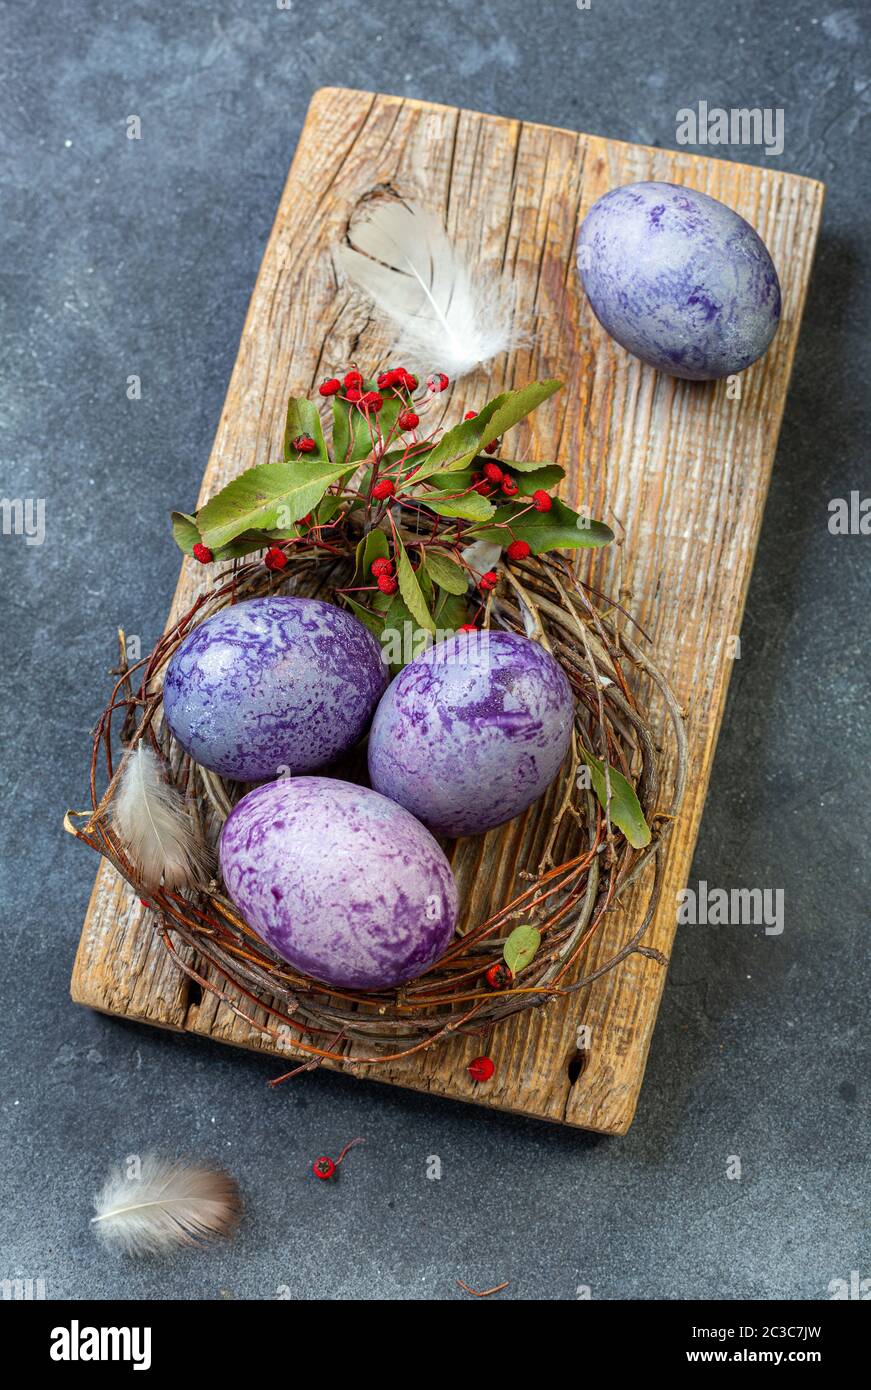 Natural dyed colorful Easter eggs. Stock Photo